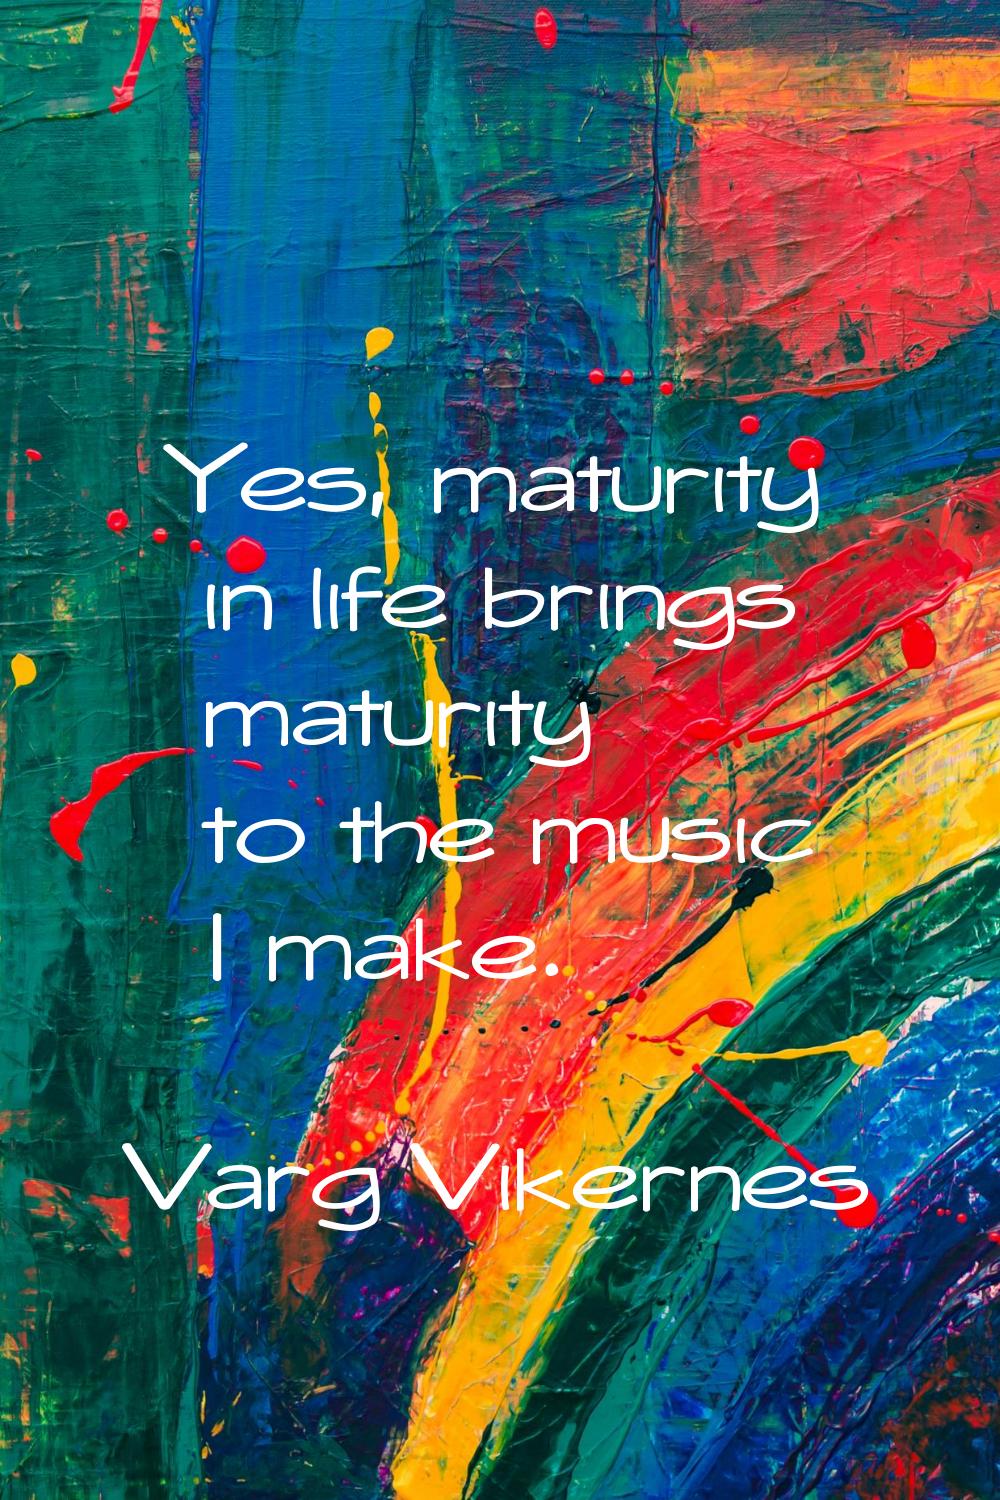 Yes, maturity in life brings maturity to the music I make.